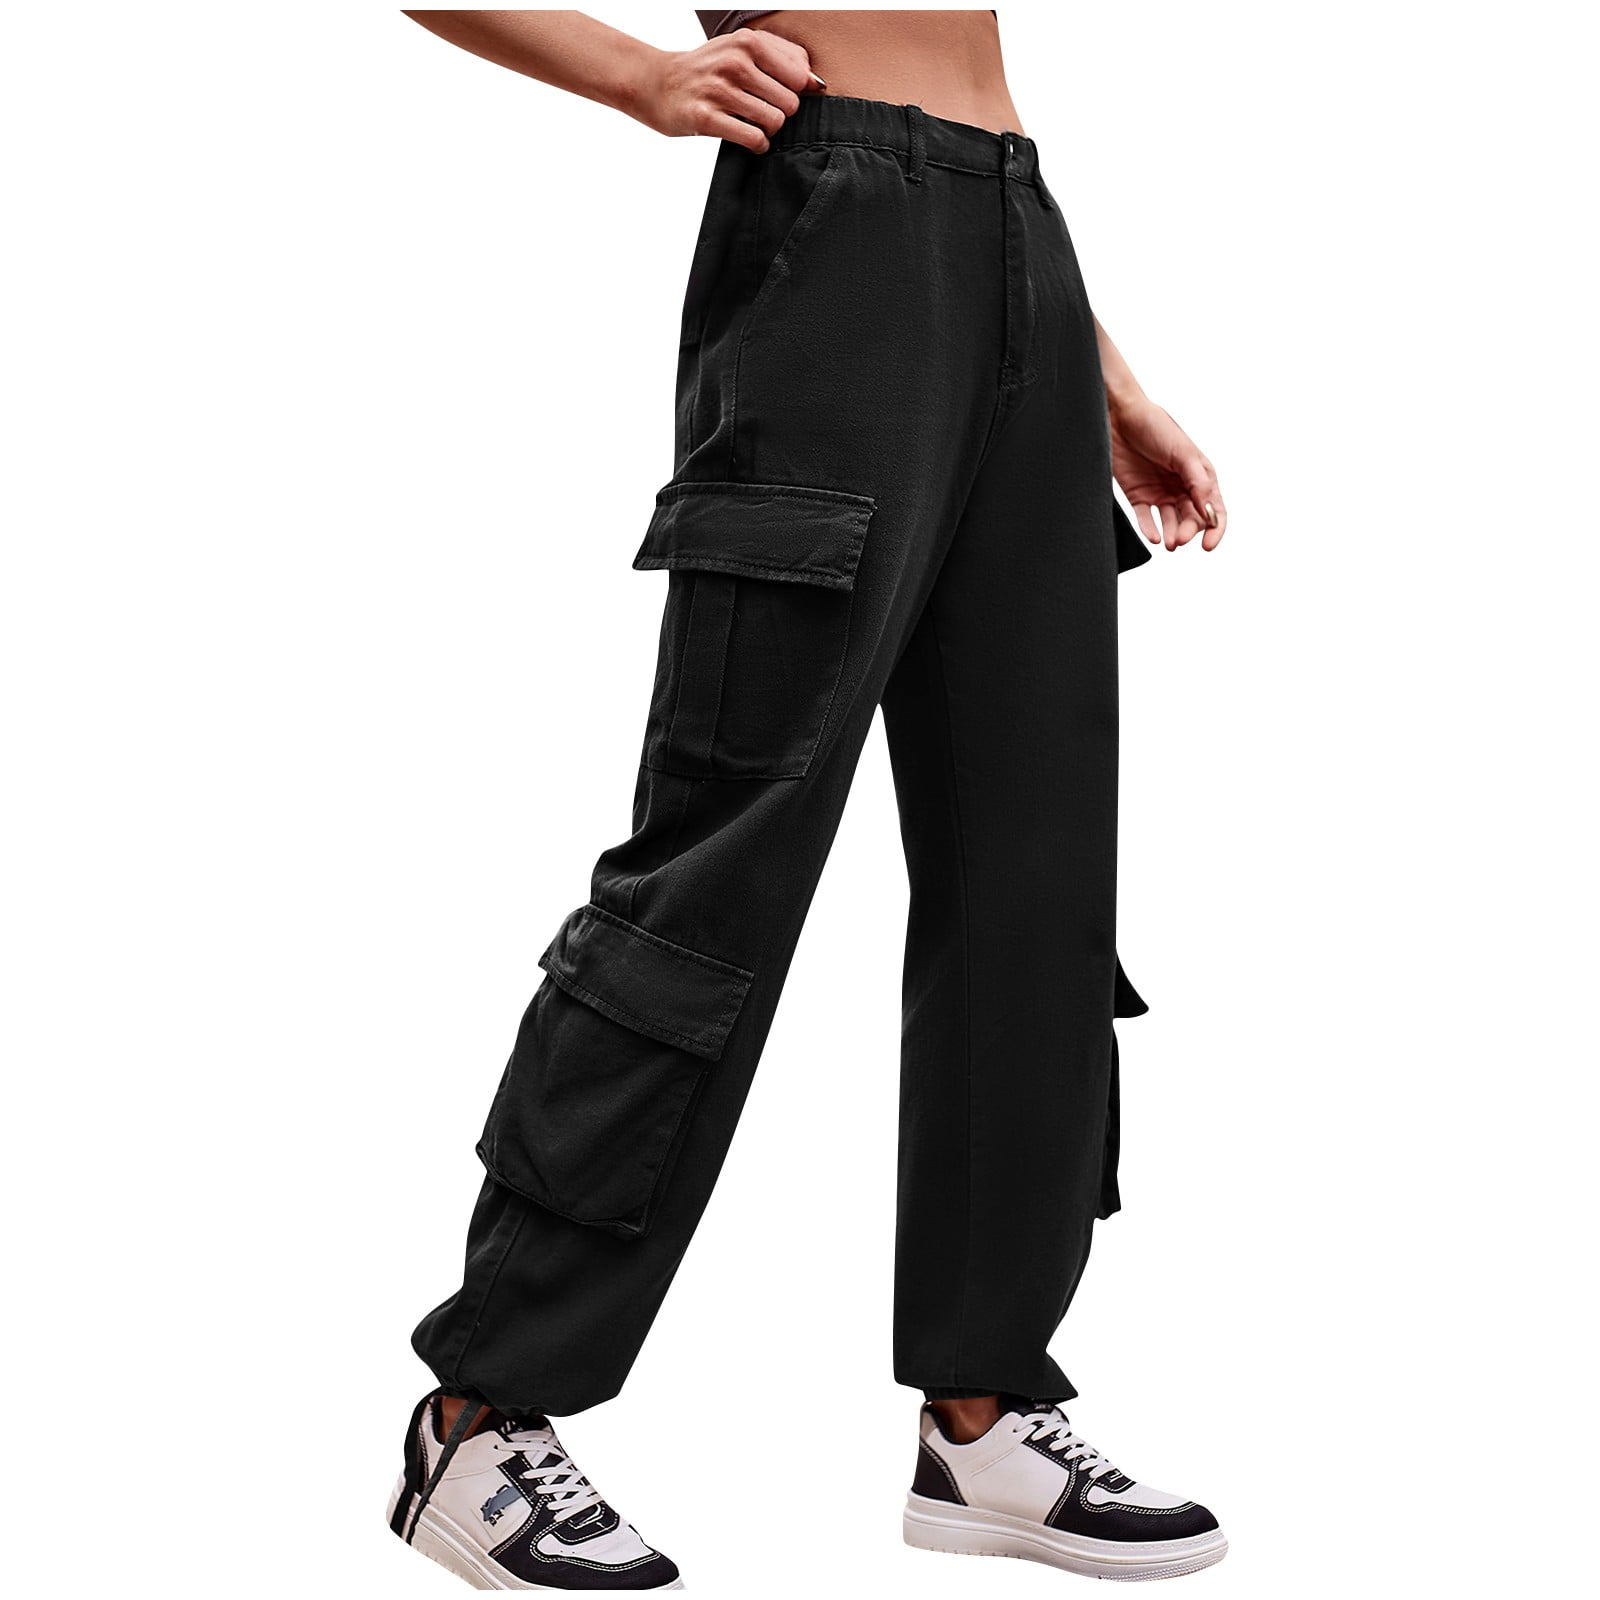 HIMIWAY Cargo Pants Women Palazzo Pants for Women Women's Fashion Casual  Solid Color Drawstring Jeans Overalls Sports Pants Black E L 